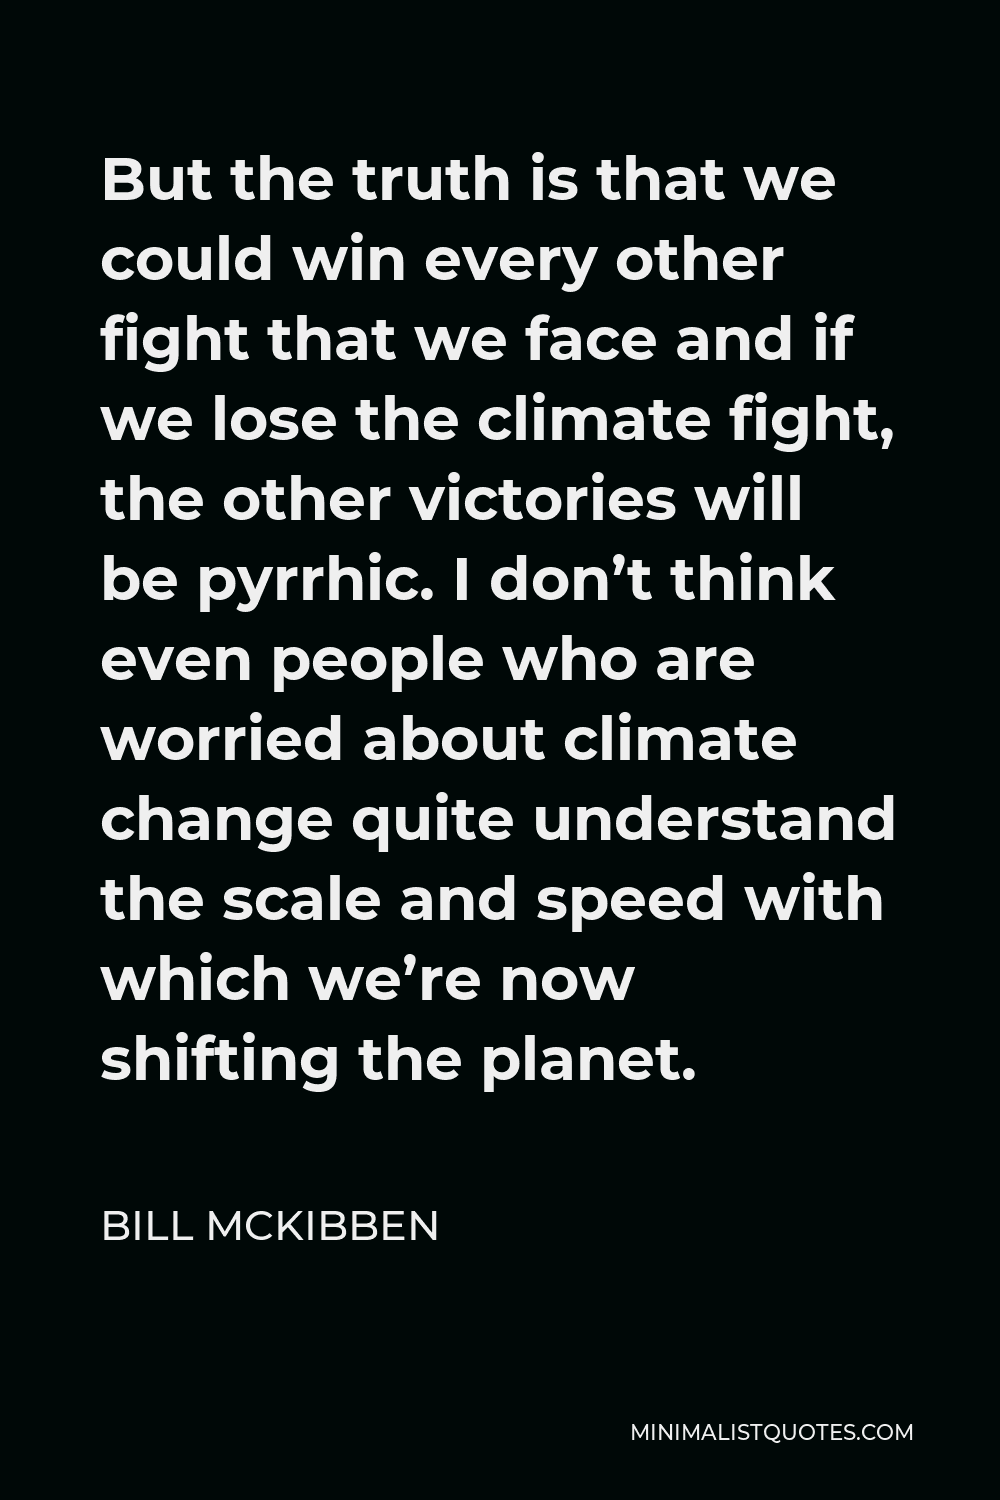 Bill McKibben Quote - But the truth is that we could win every other fight that we face and if we lose the climate fight, the other victories will be pyrrhic. I don’t think even people who are worried about climate change quite understand the scale and speed with which we’re now shifting the planet.